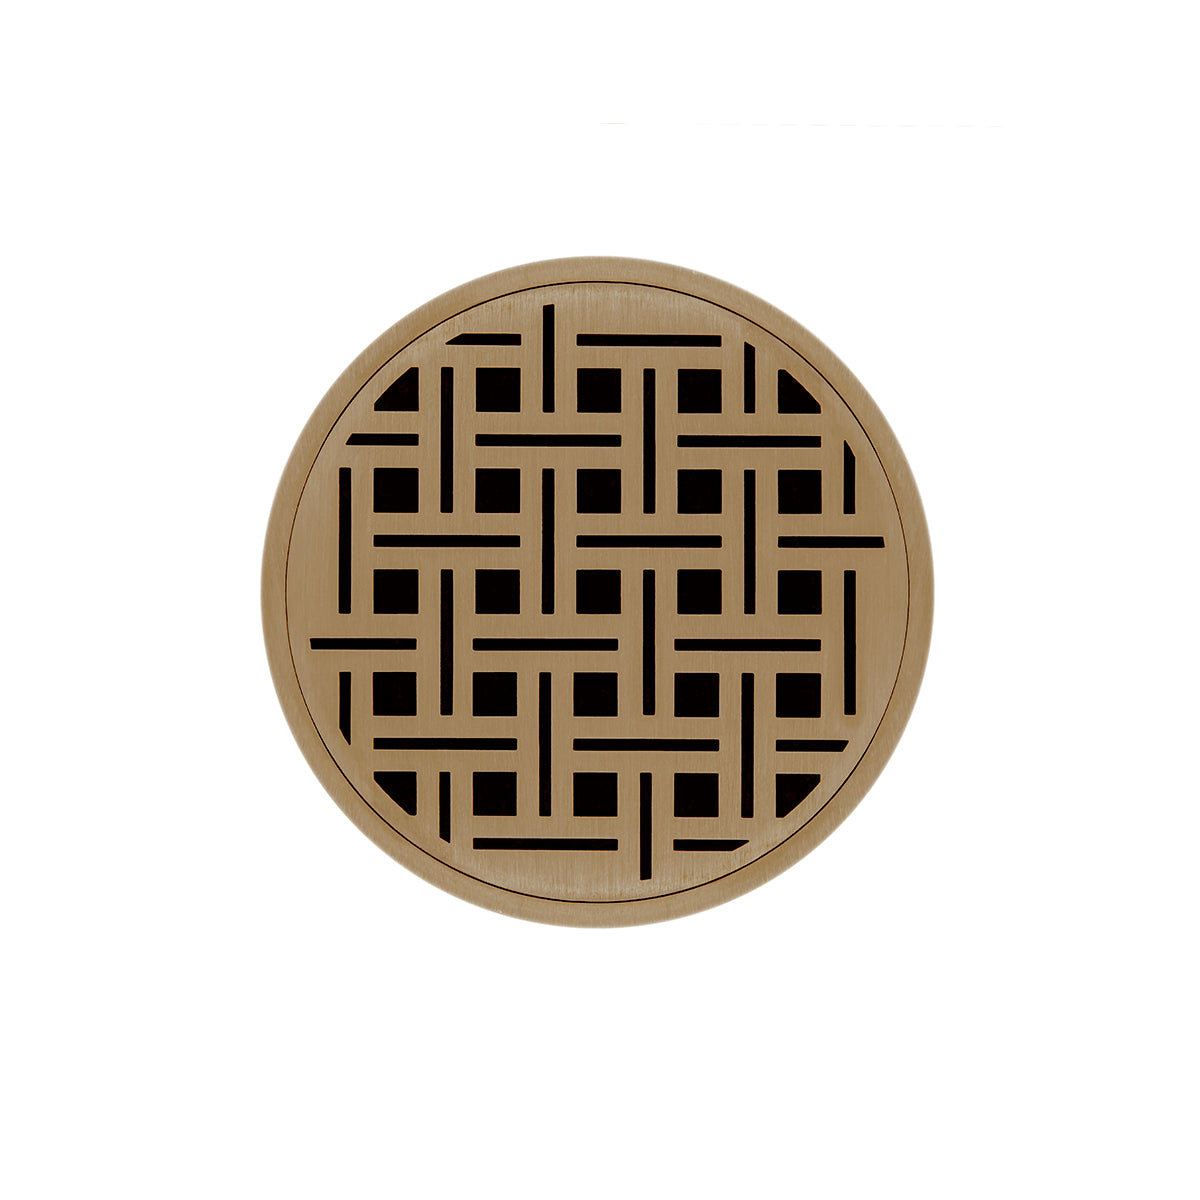 Infinity Drain 5" Round RVD 5 High Flow Premium Center Drain Kit with Weave Pattern Decorative Plate with PVC Drain Body, 3" Outlet